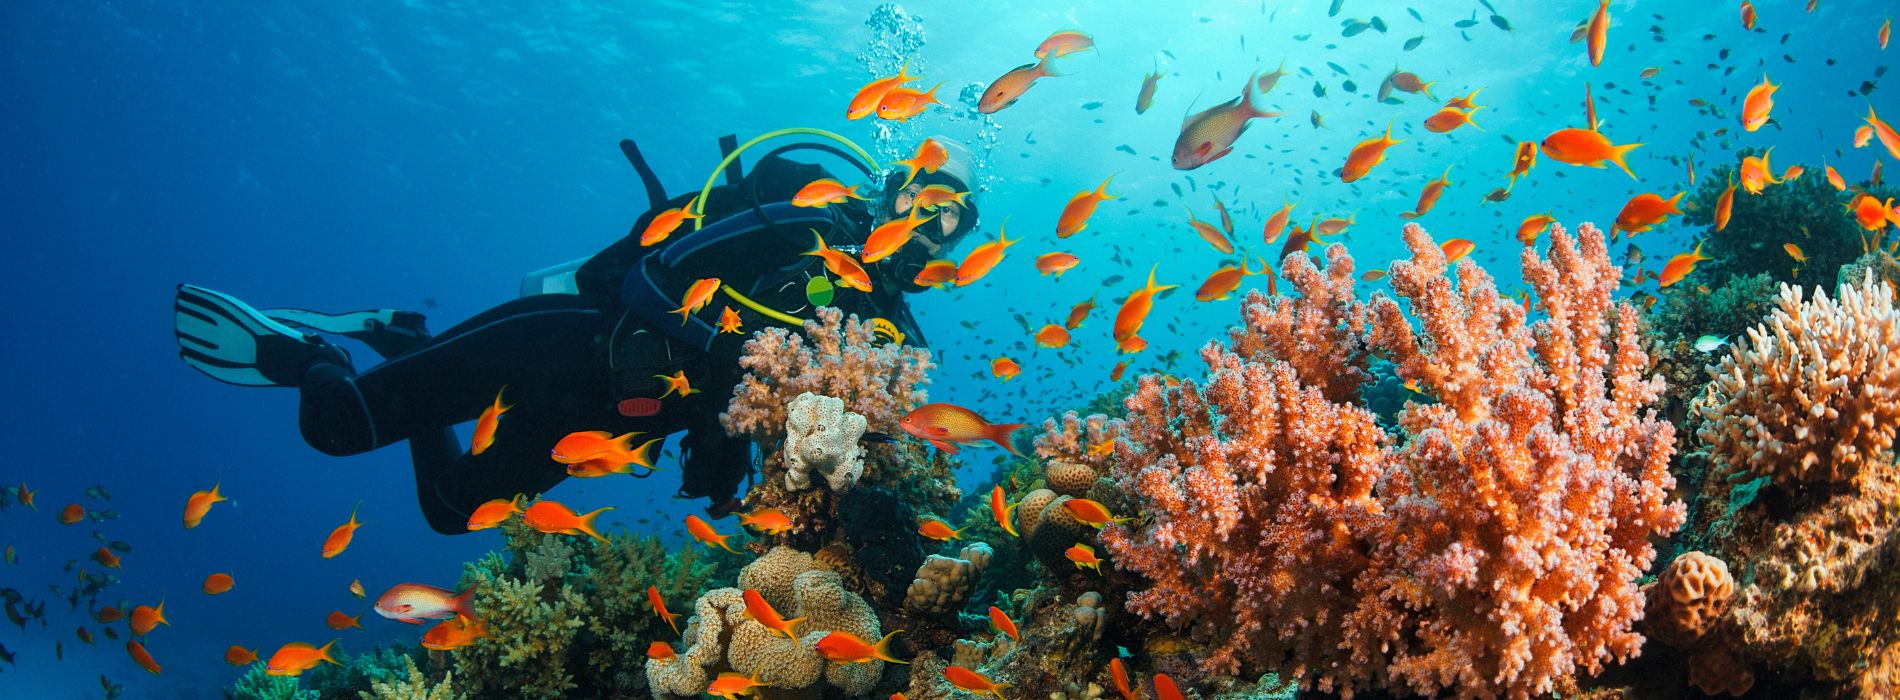 Best Places to Scuba Dive in Puerto Rico - Madeinsea©